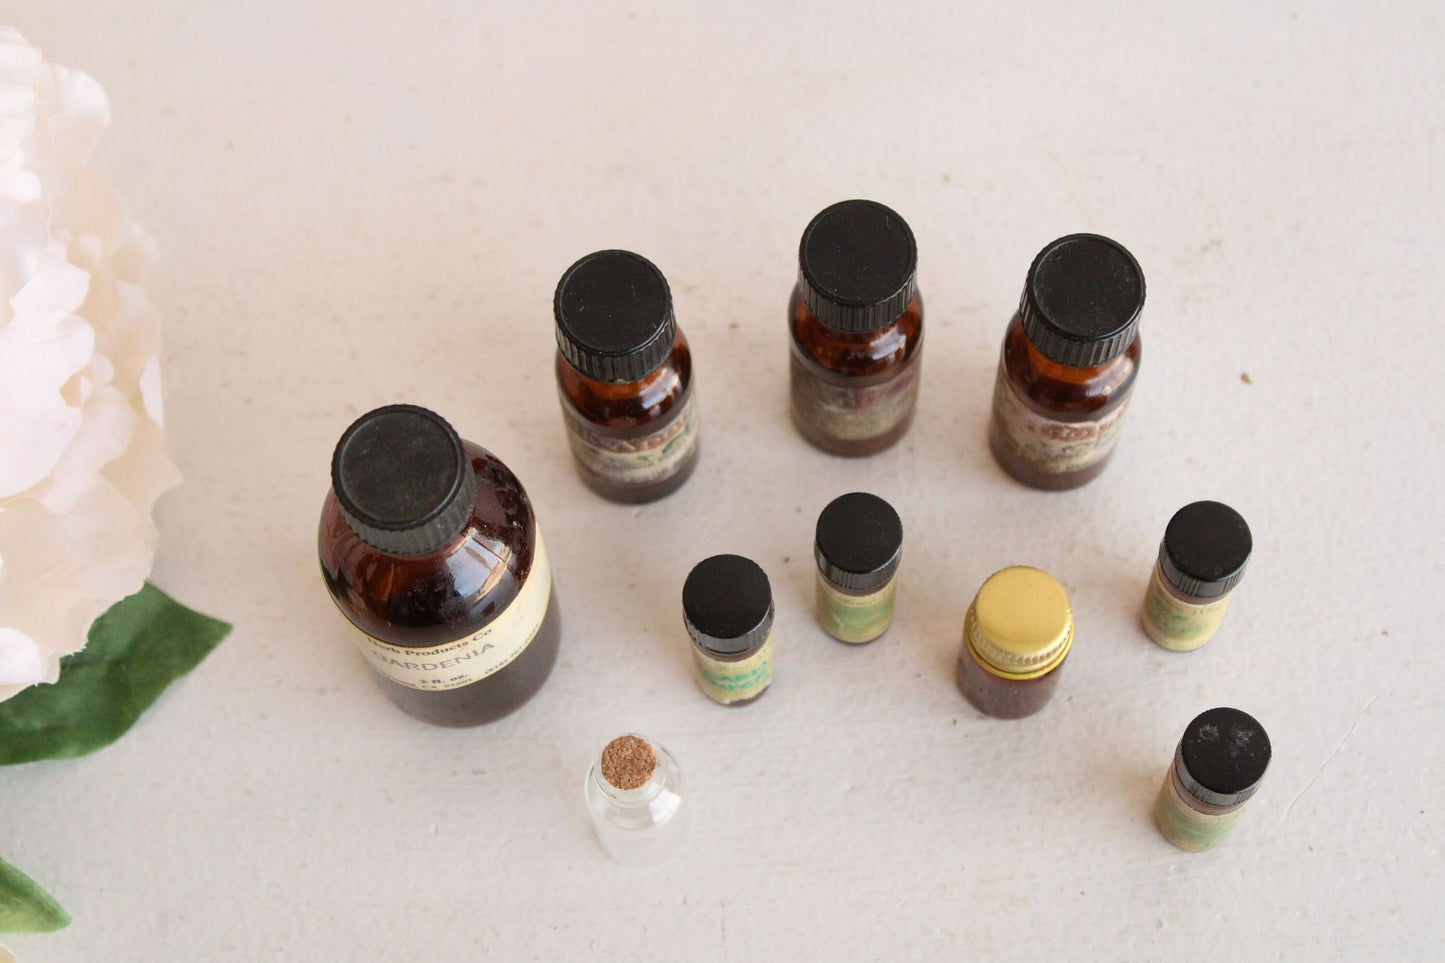 Lot of 10 Glass Essential Oil Bottles, Empty, Brown and Clear, Variety of Sizes and Shapes